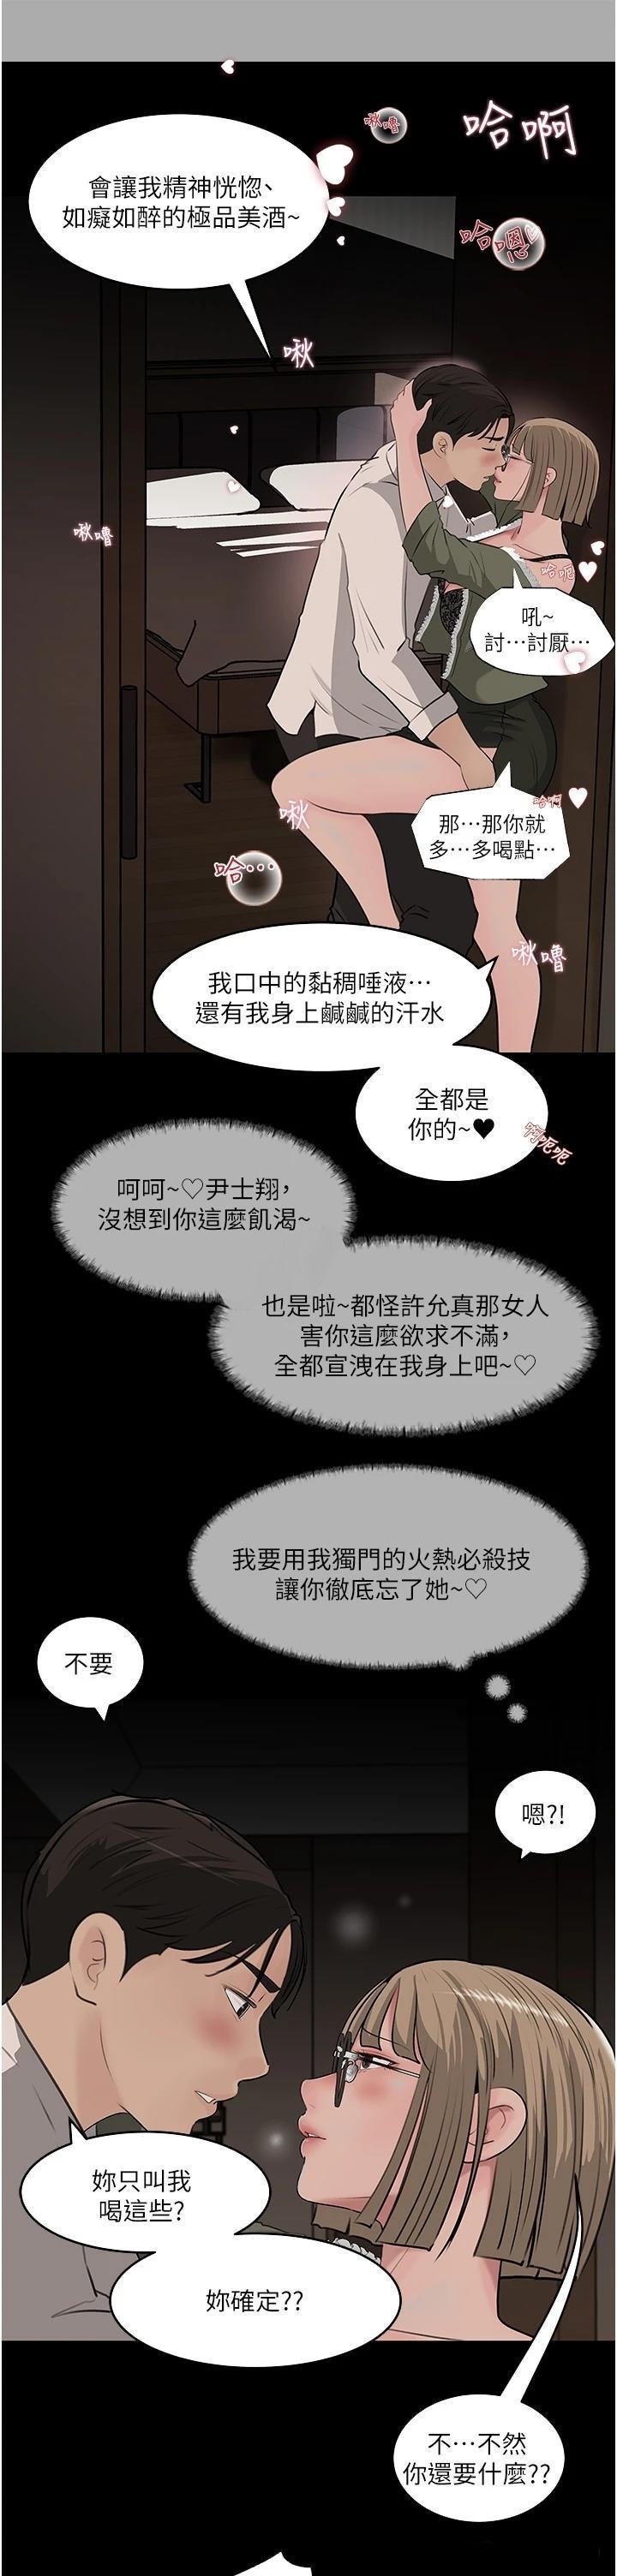 in-my-sister-in-law-raw-chap-37-18